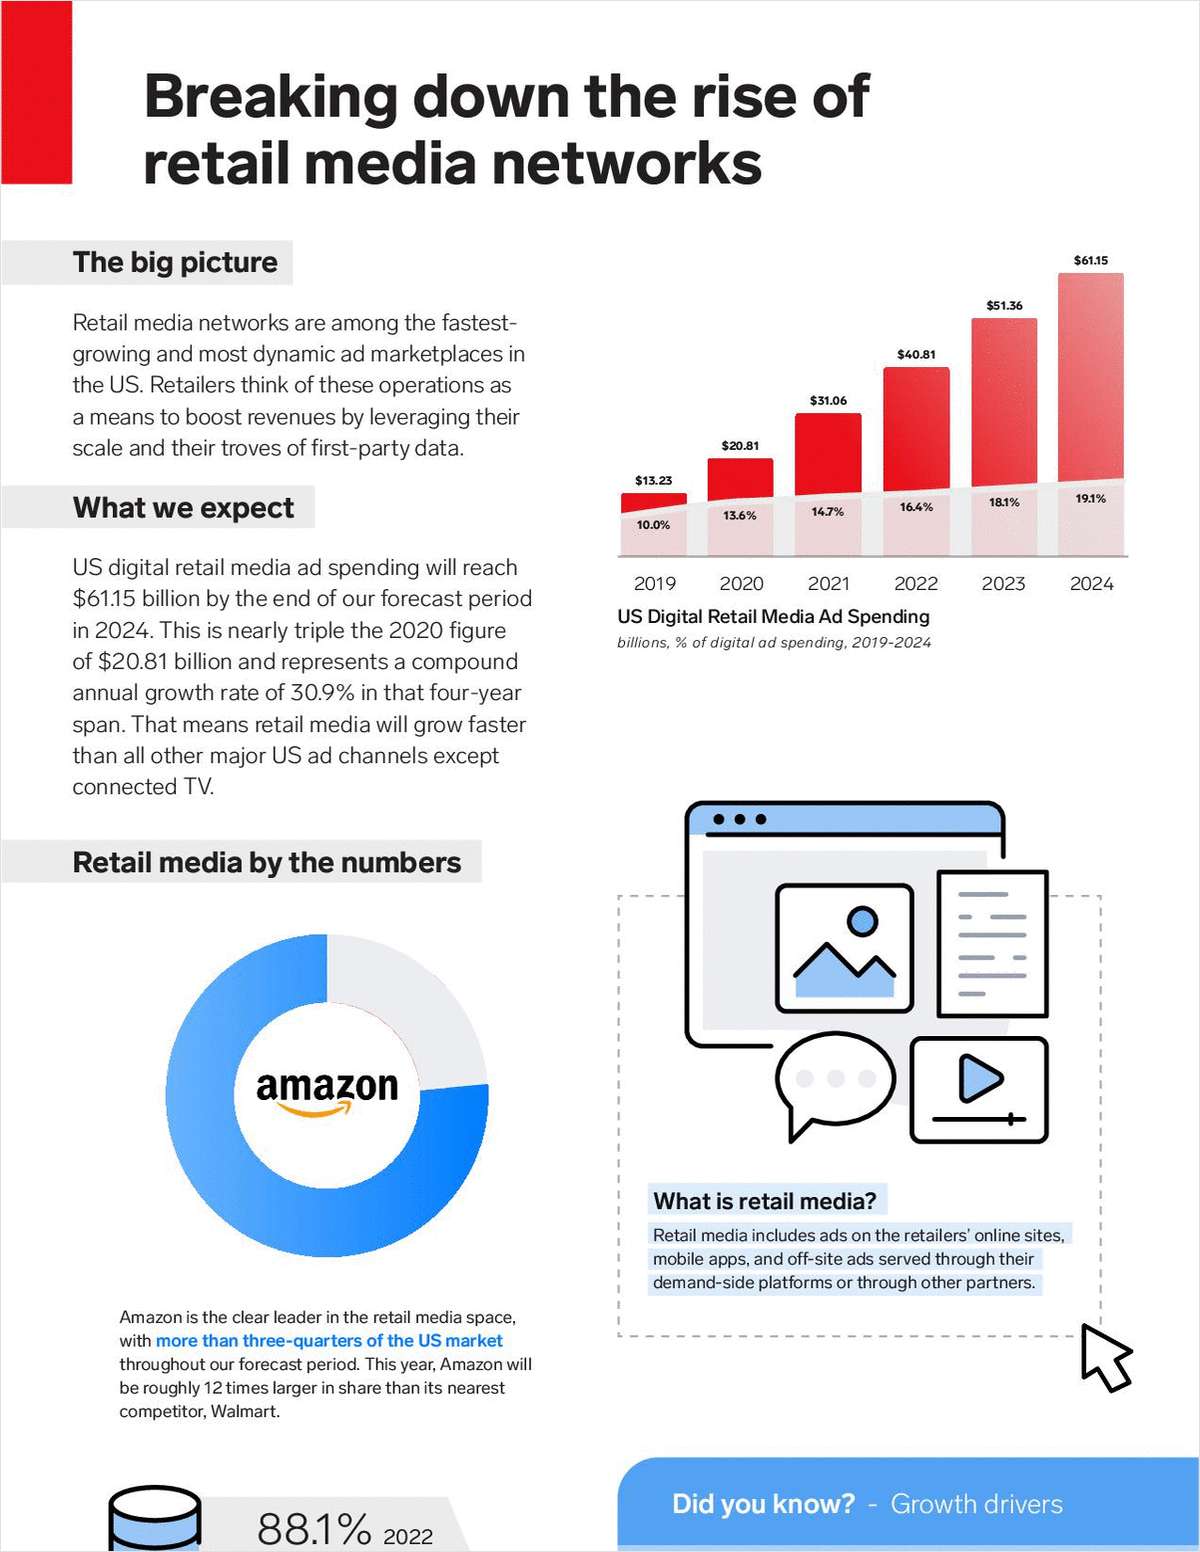 Request Your Free Report Now:  Breaking Down the Rise of Retail Media Networks